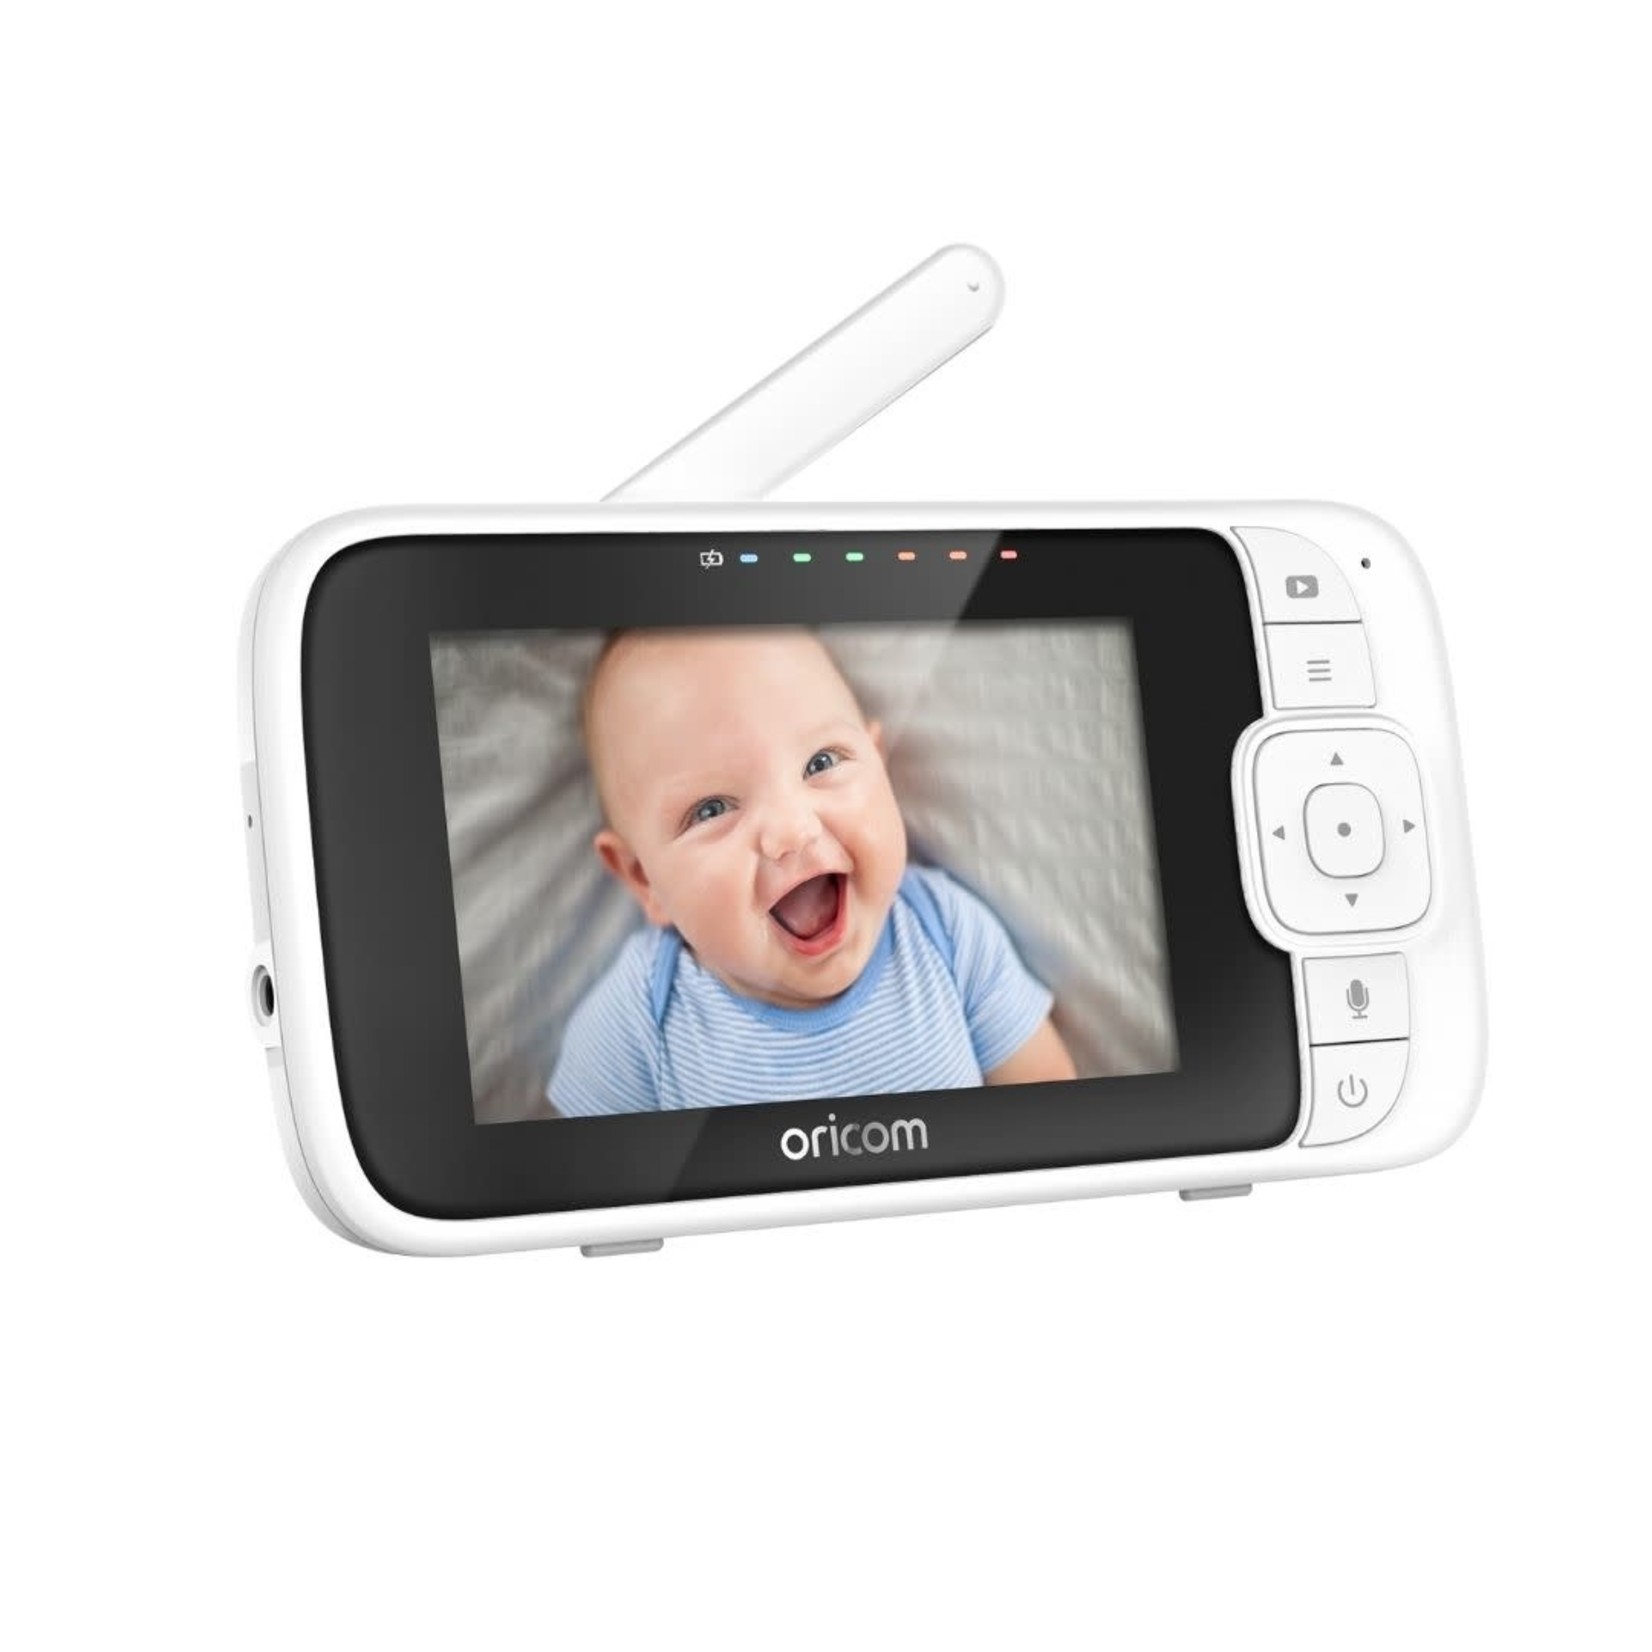 Oricom Smart 4.3" WiFi Video Baby Monitor FHD 1080p with Digital Pan Tilt and Zoom Camera(OBH430)